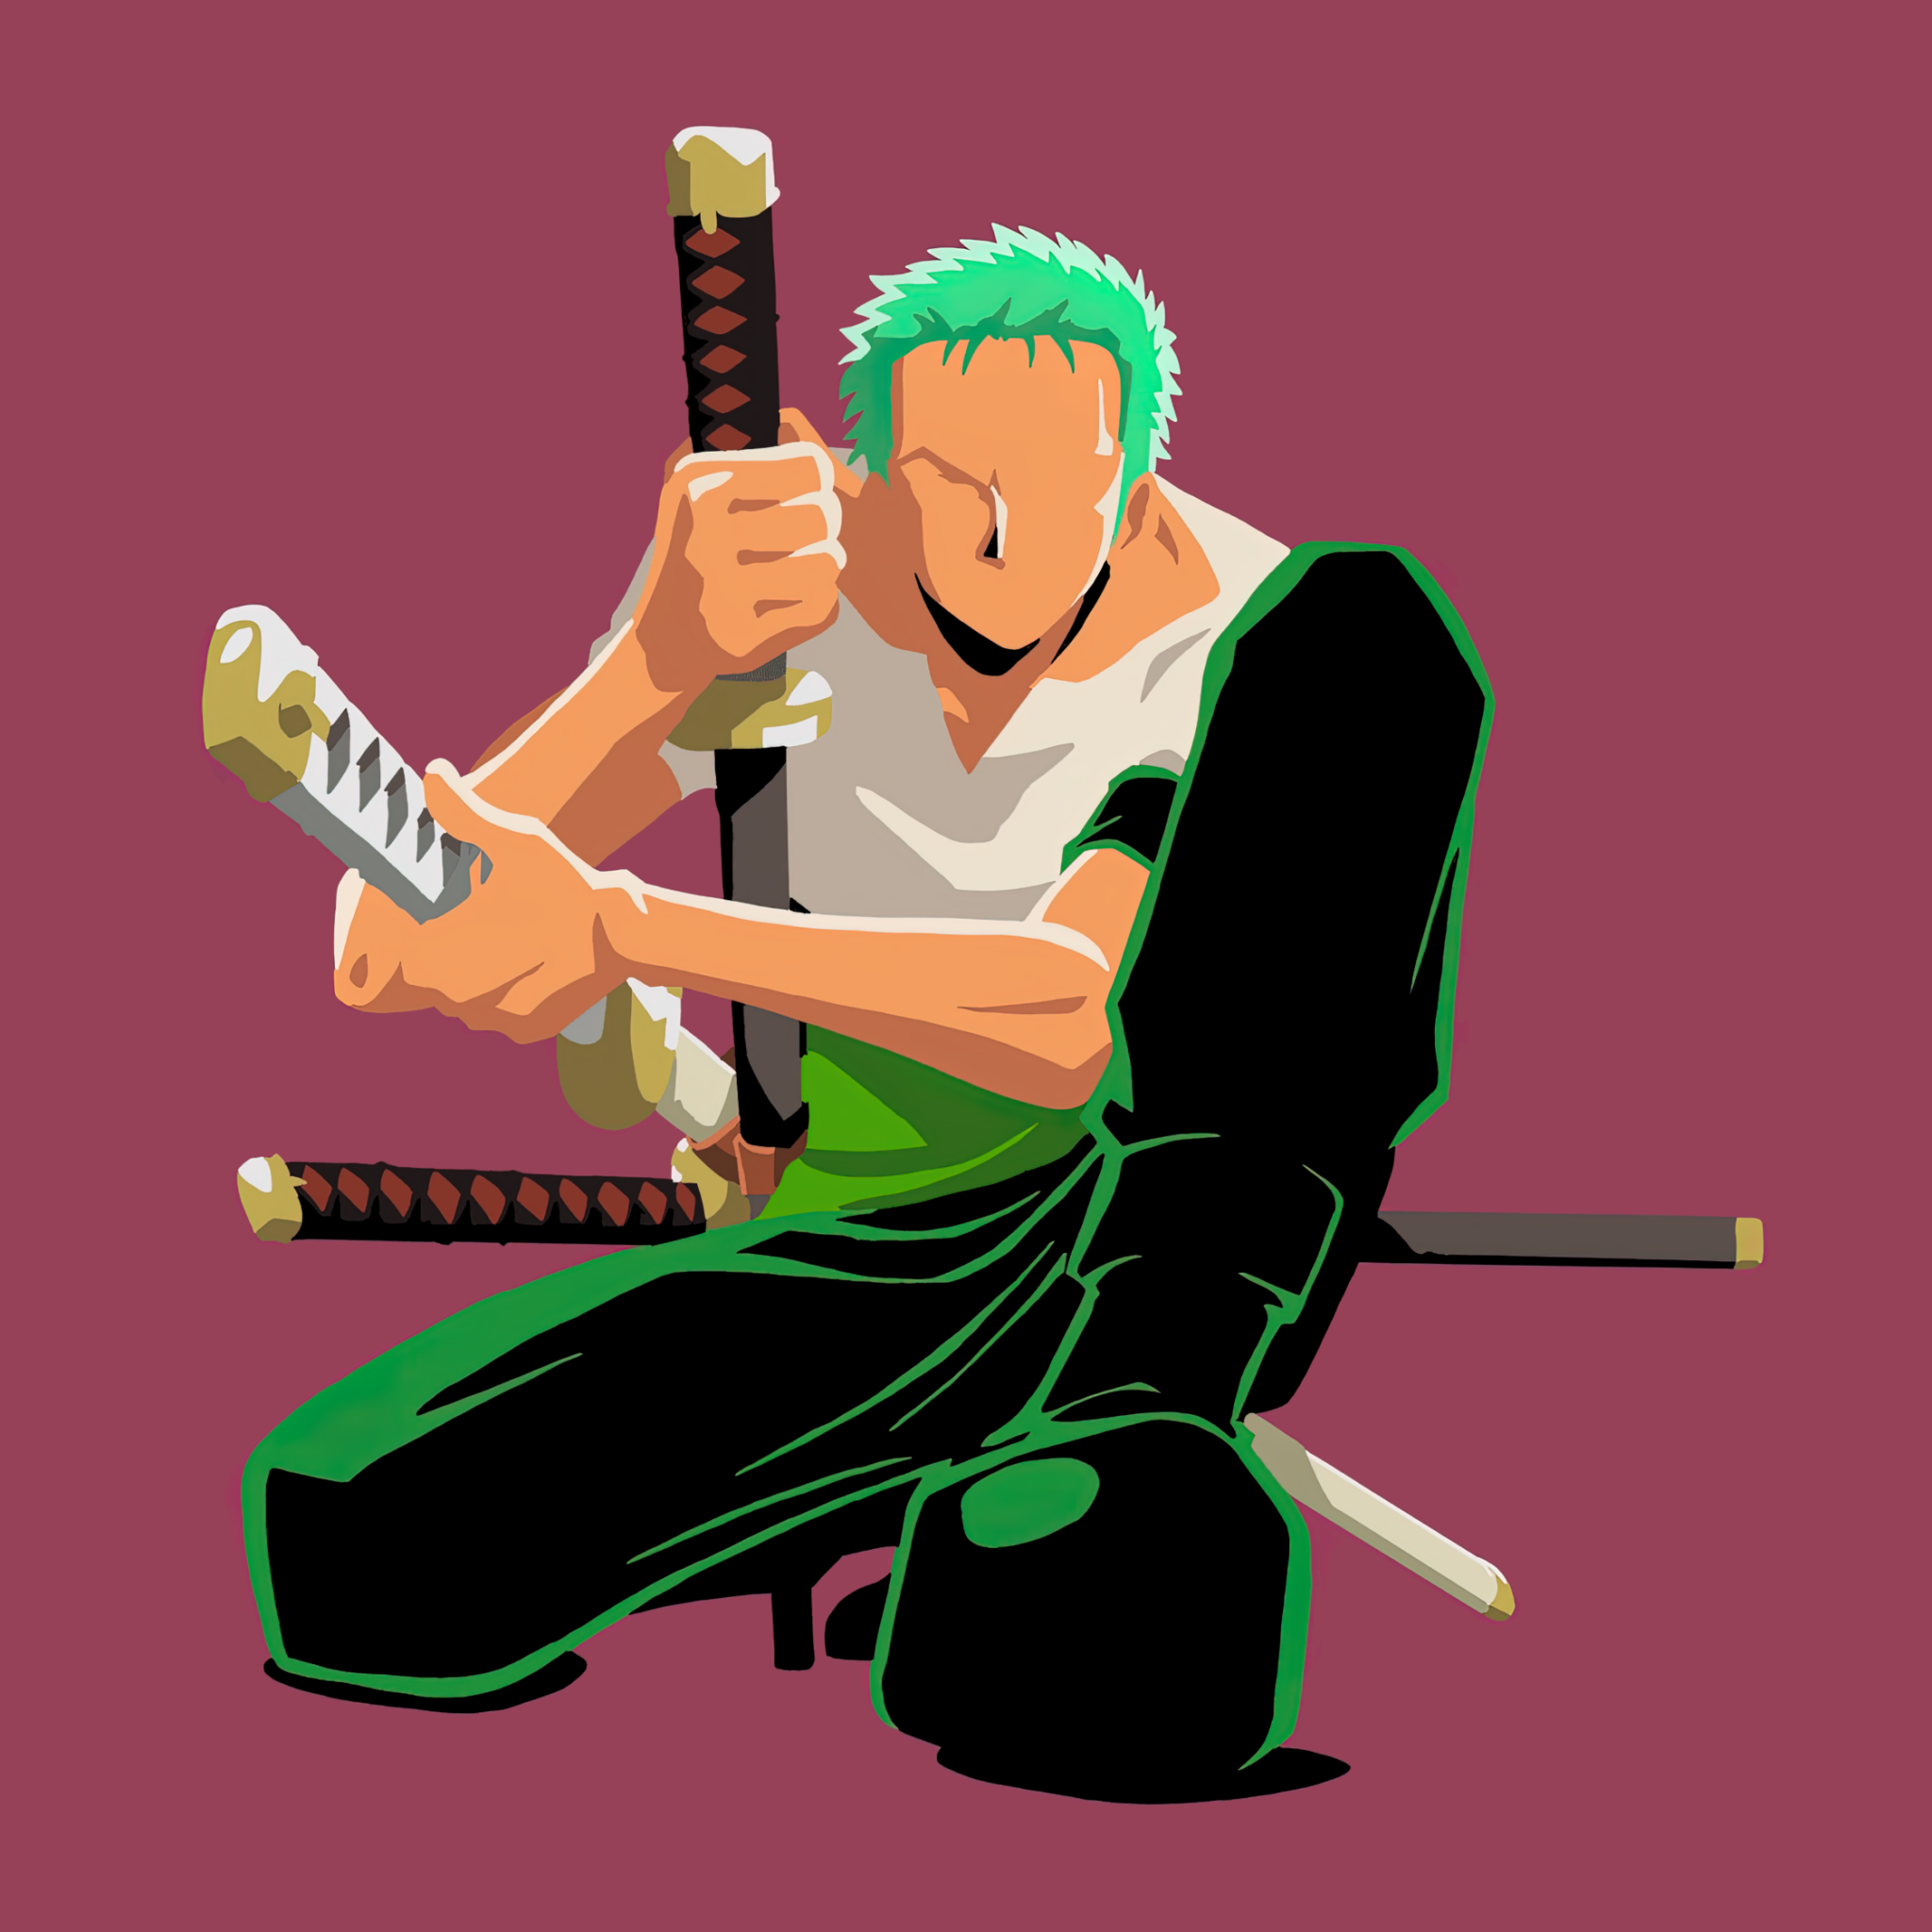 46 Roronoa Zoro Wallpapers for iPhone and Android by Lee White